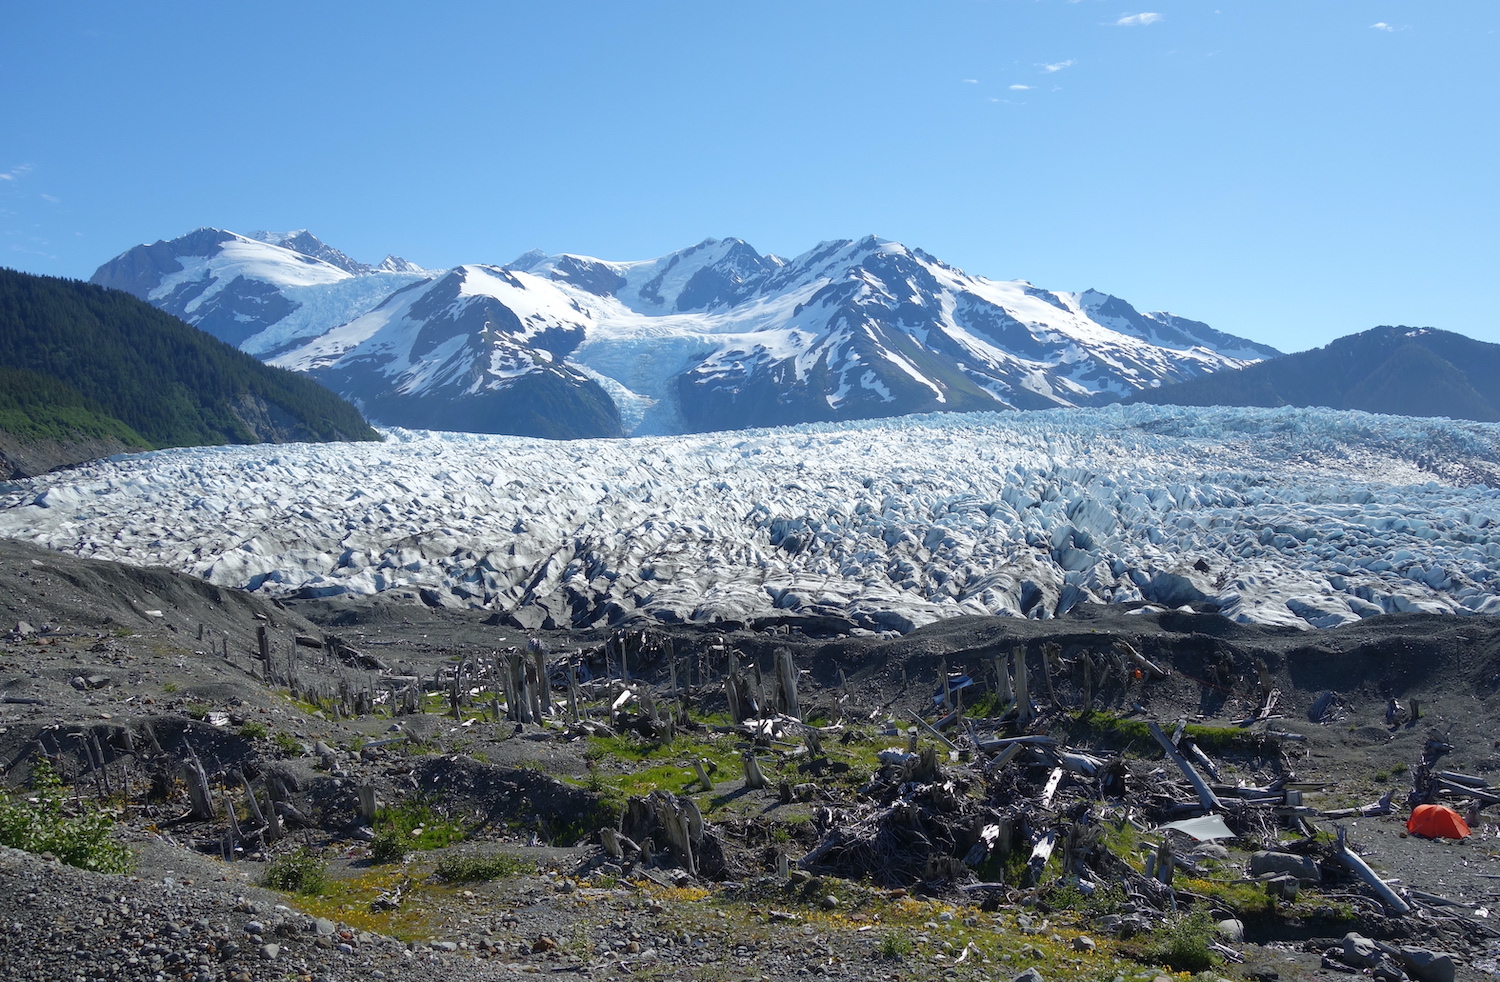 A rugged glacier and mountains rise above a expanse of gravel studded with old tree stumps.